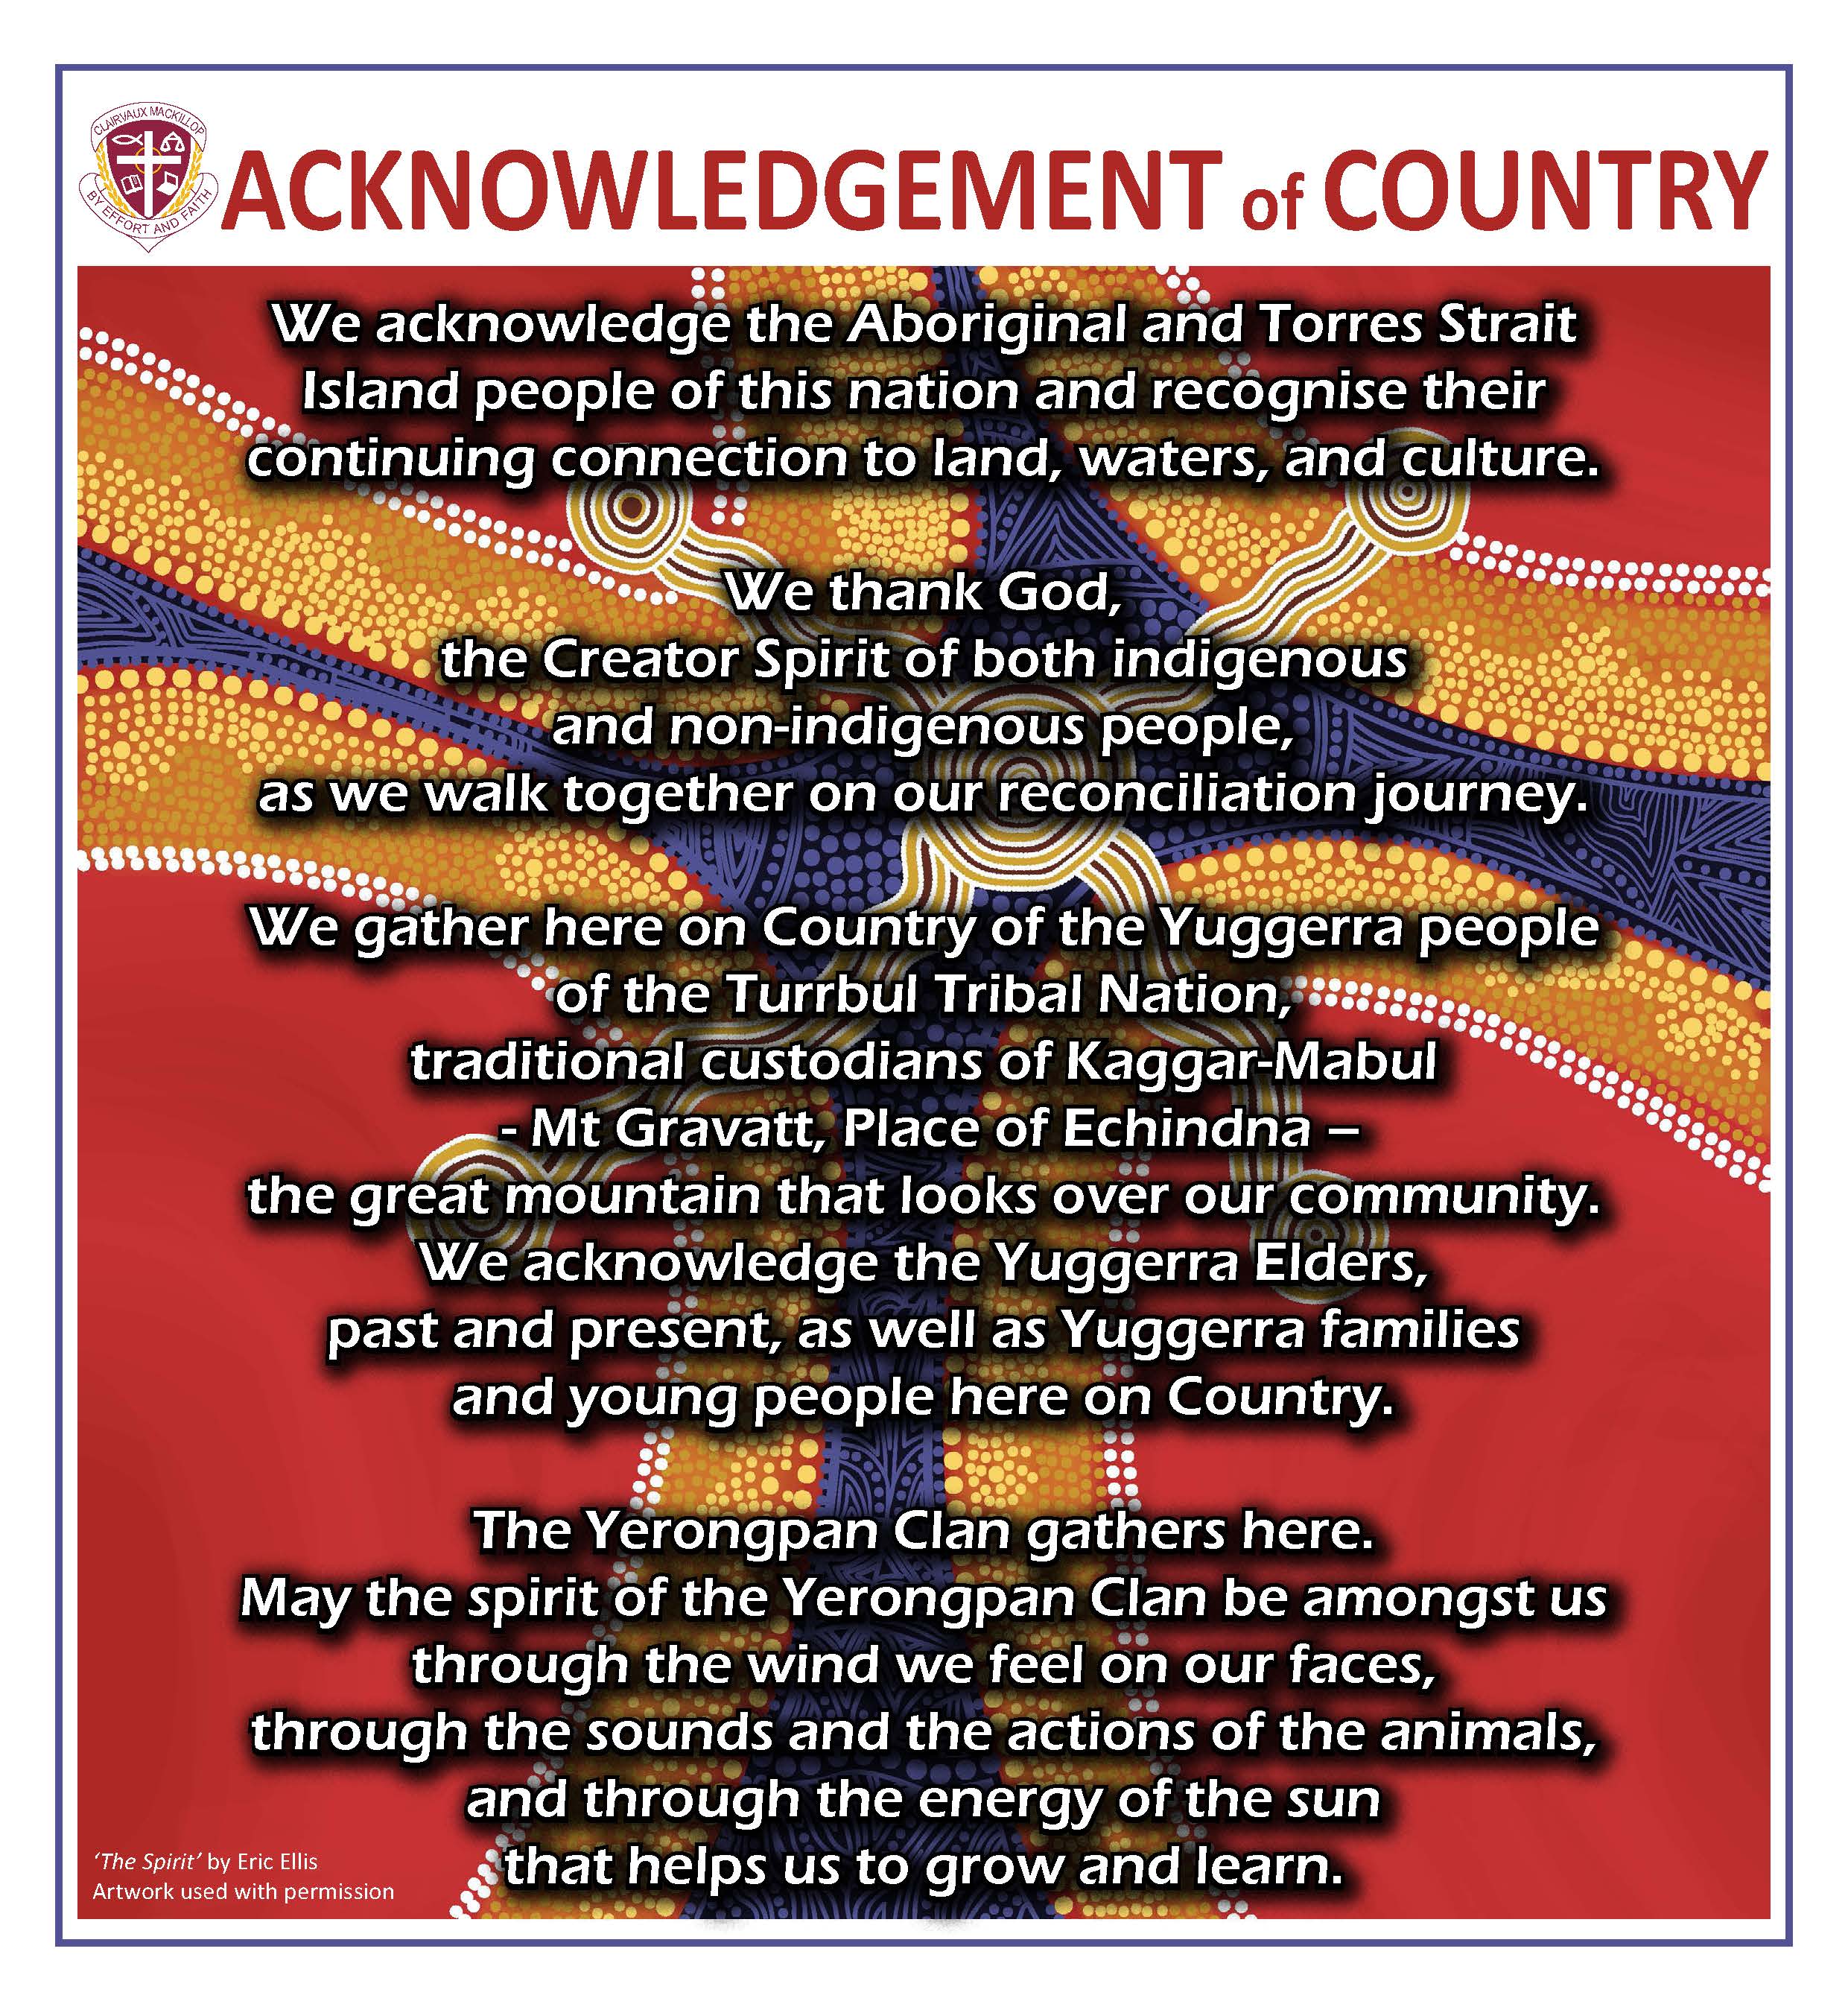 Acknowledgement of Country.jpg